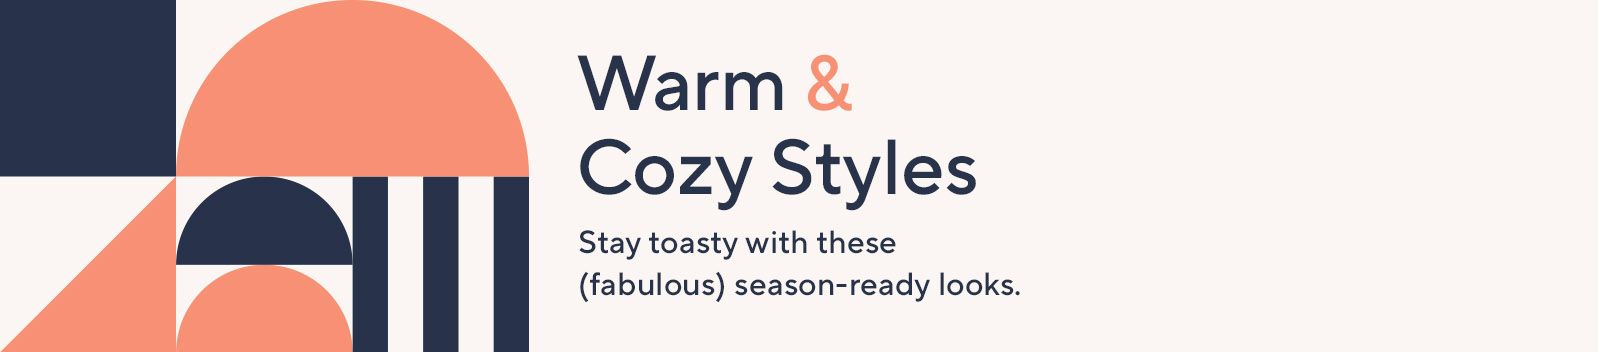 Warm & Cozy Styles - Stay toasty with these (fabulous) season-ready looks. 